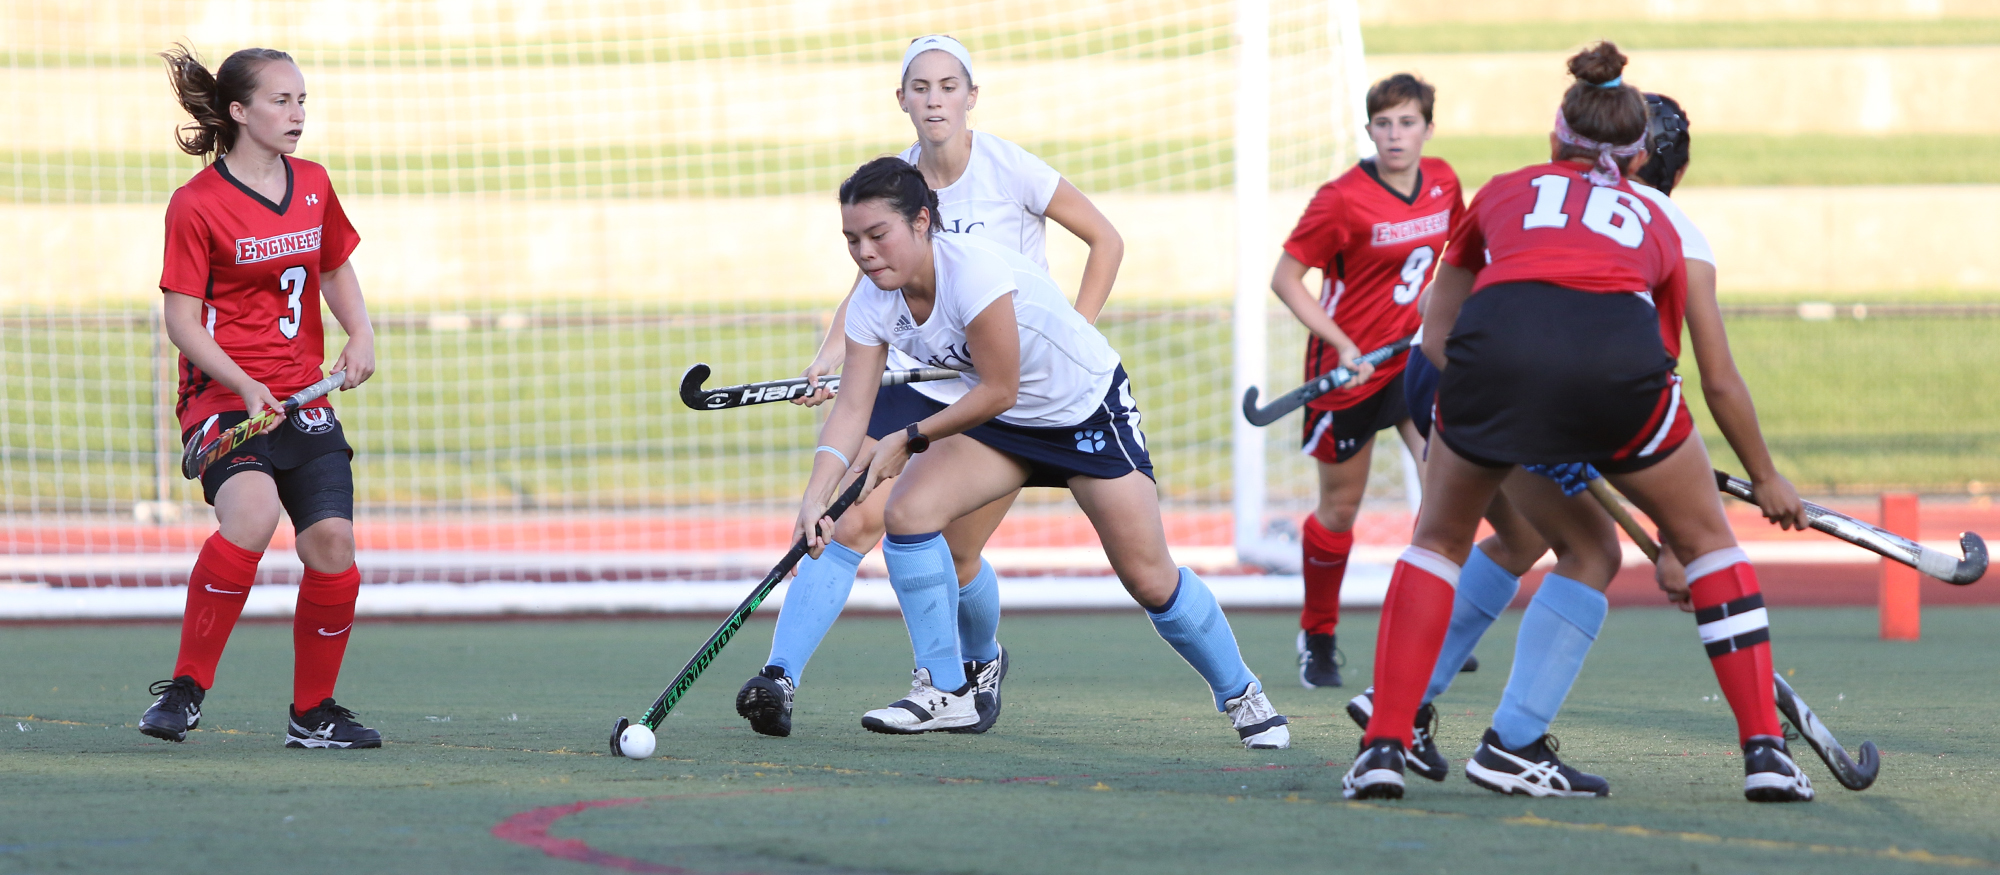 Senior field hockey player Liz Delorme dribbles the ball during a 3-2 win at RPI on Sept. 2, 2018. Photo credit to Perry Laskaris (RPI Athletics)